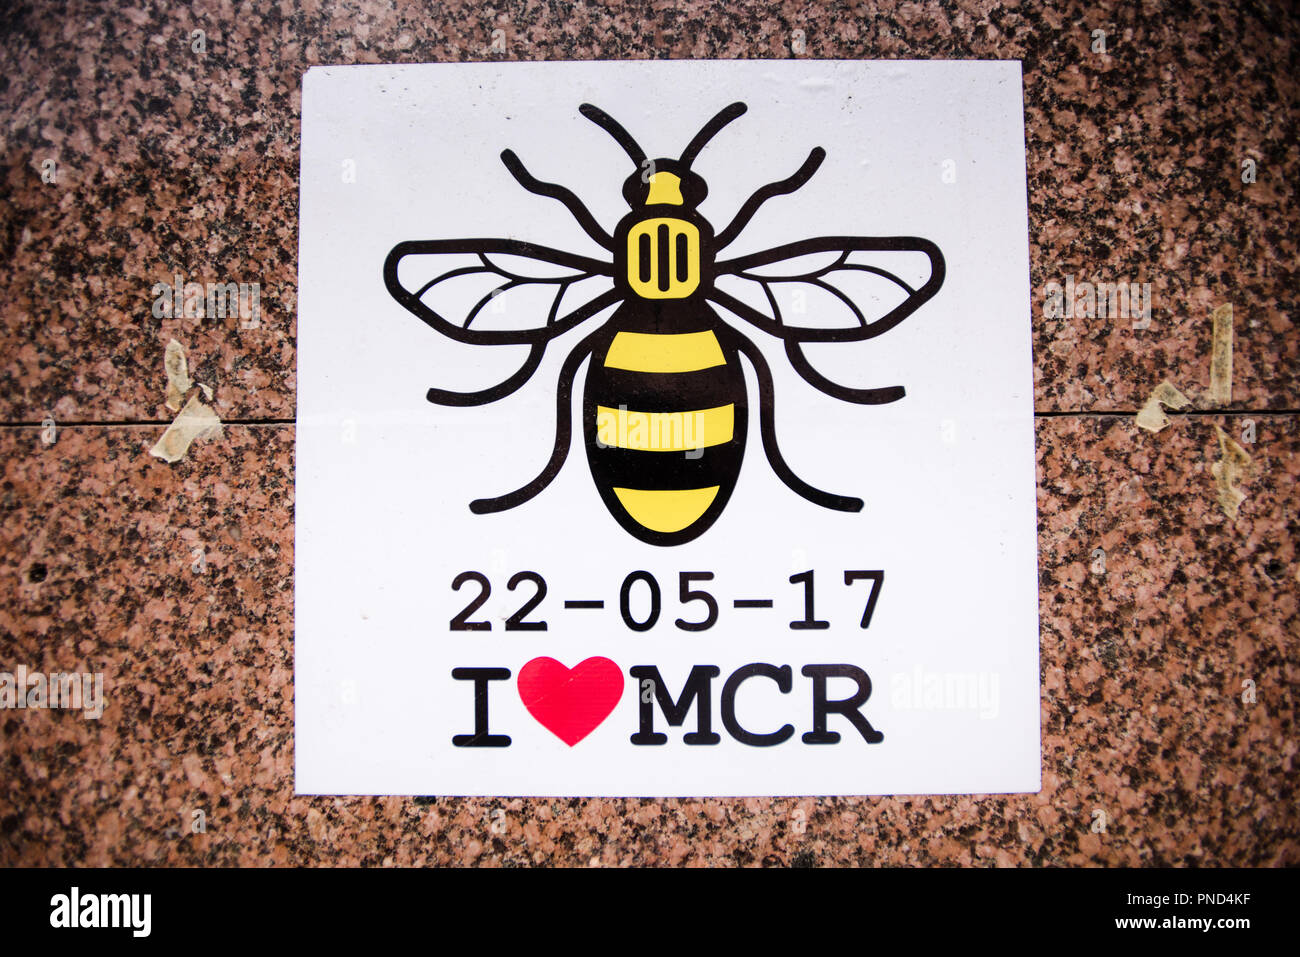 Manchester Arena bombing, Bee Poster 22-05-17 Stock Photo